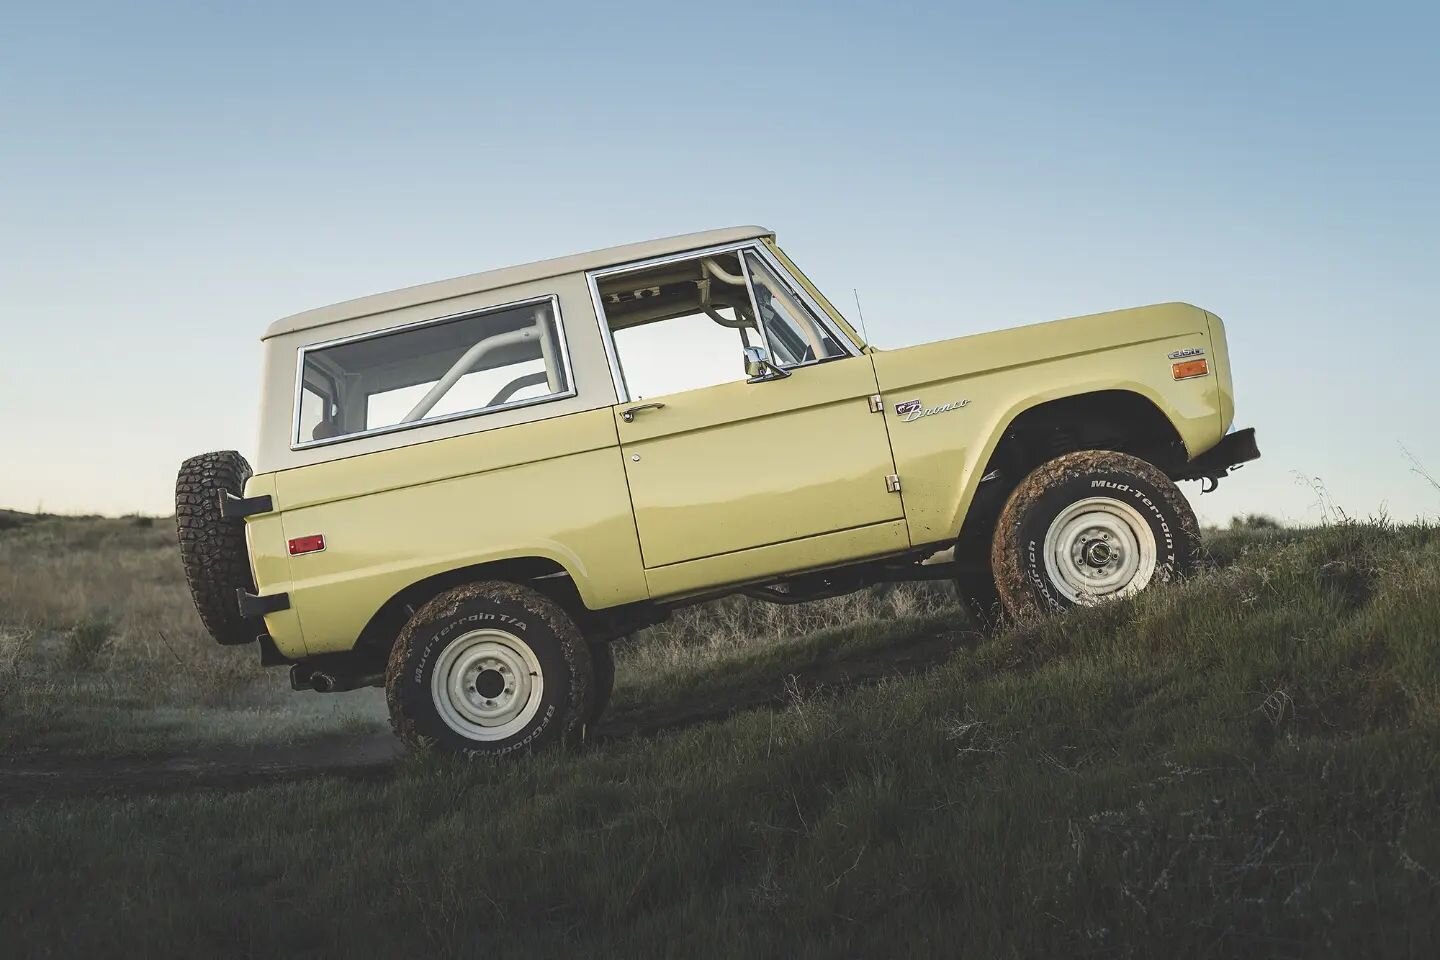 Sunrise shoot with Bradfords 1970 Uncut Bronco in a summery Yucatan Gold ⭐
@garrettsmith928 assisting with the edits and shooting. Know anyone with a sweet ride? We're looking for some cool cars. Tag them below. 
#bronco #vintagebronco #vintage4x4
#f